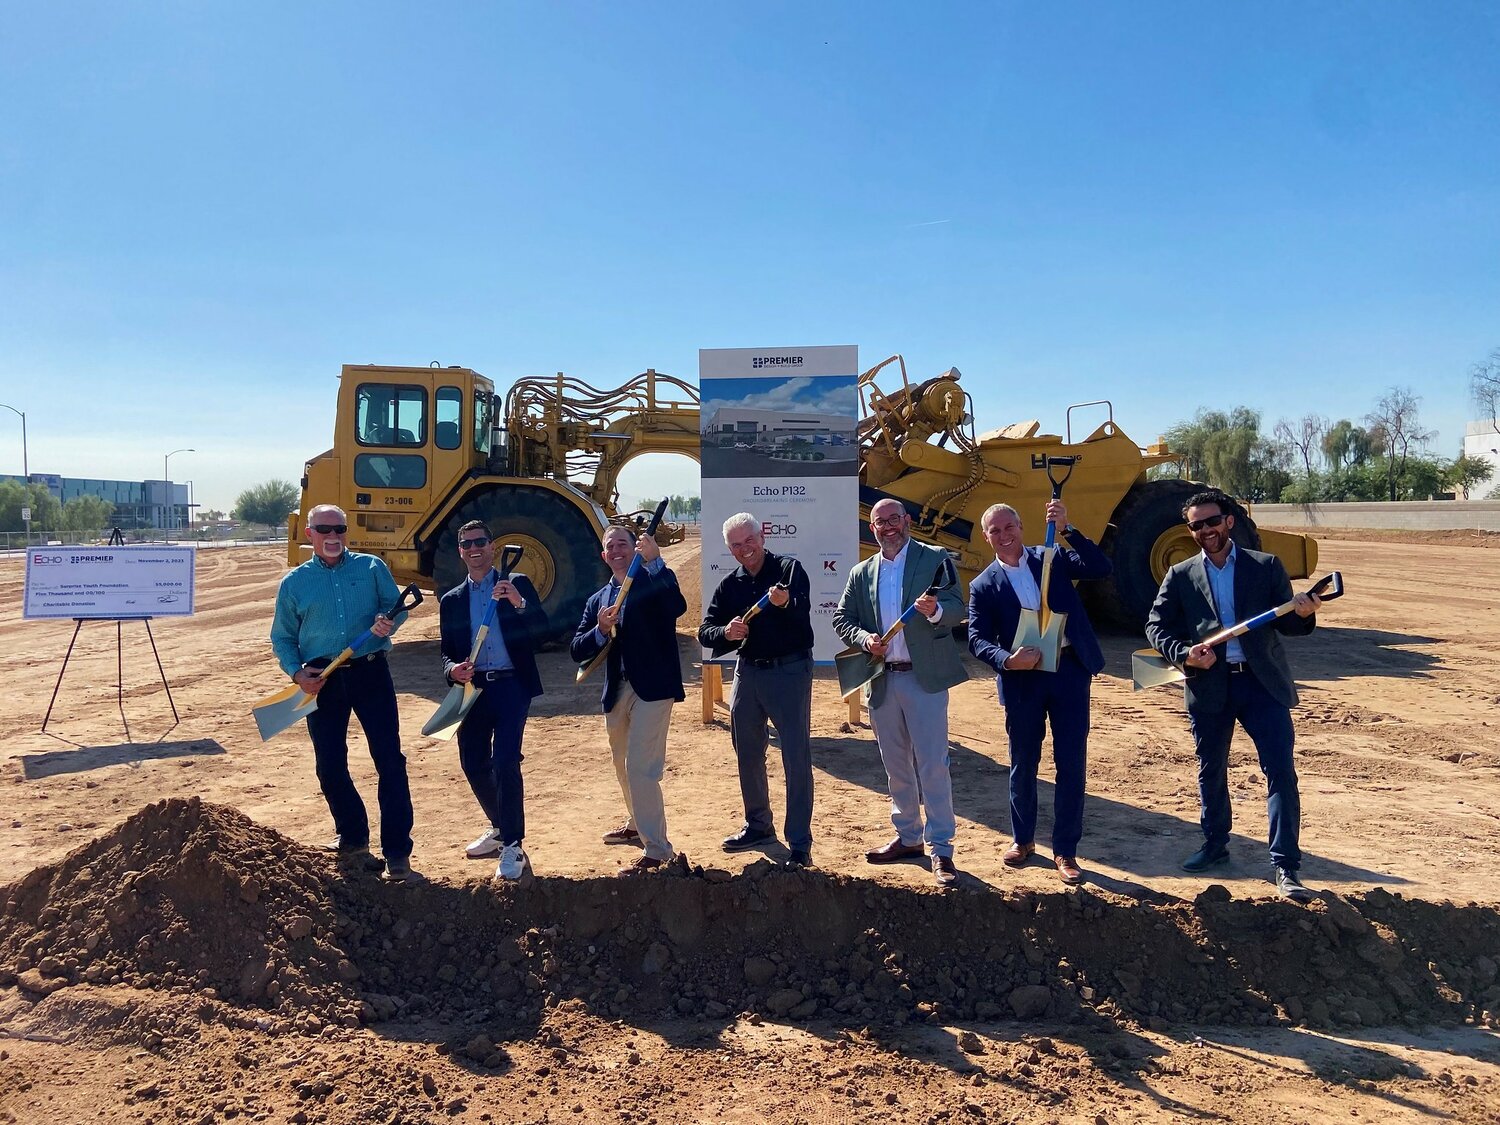 Surprise Mayor Skip Hall, center, was among the group that put shovels in the ground at an official ceremony Nov. 2 for the ECHO P132 industrial complex at 132nd and Peoria avenues.